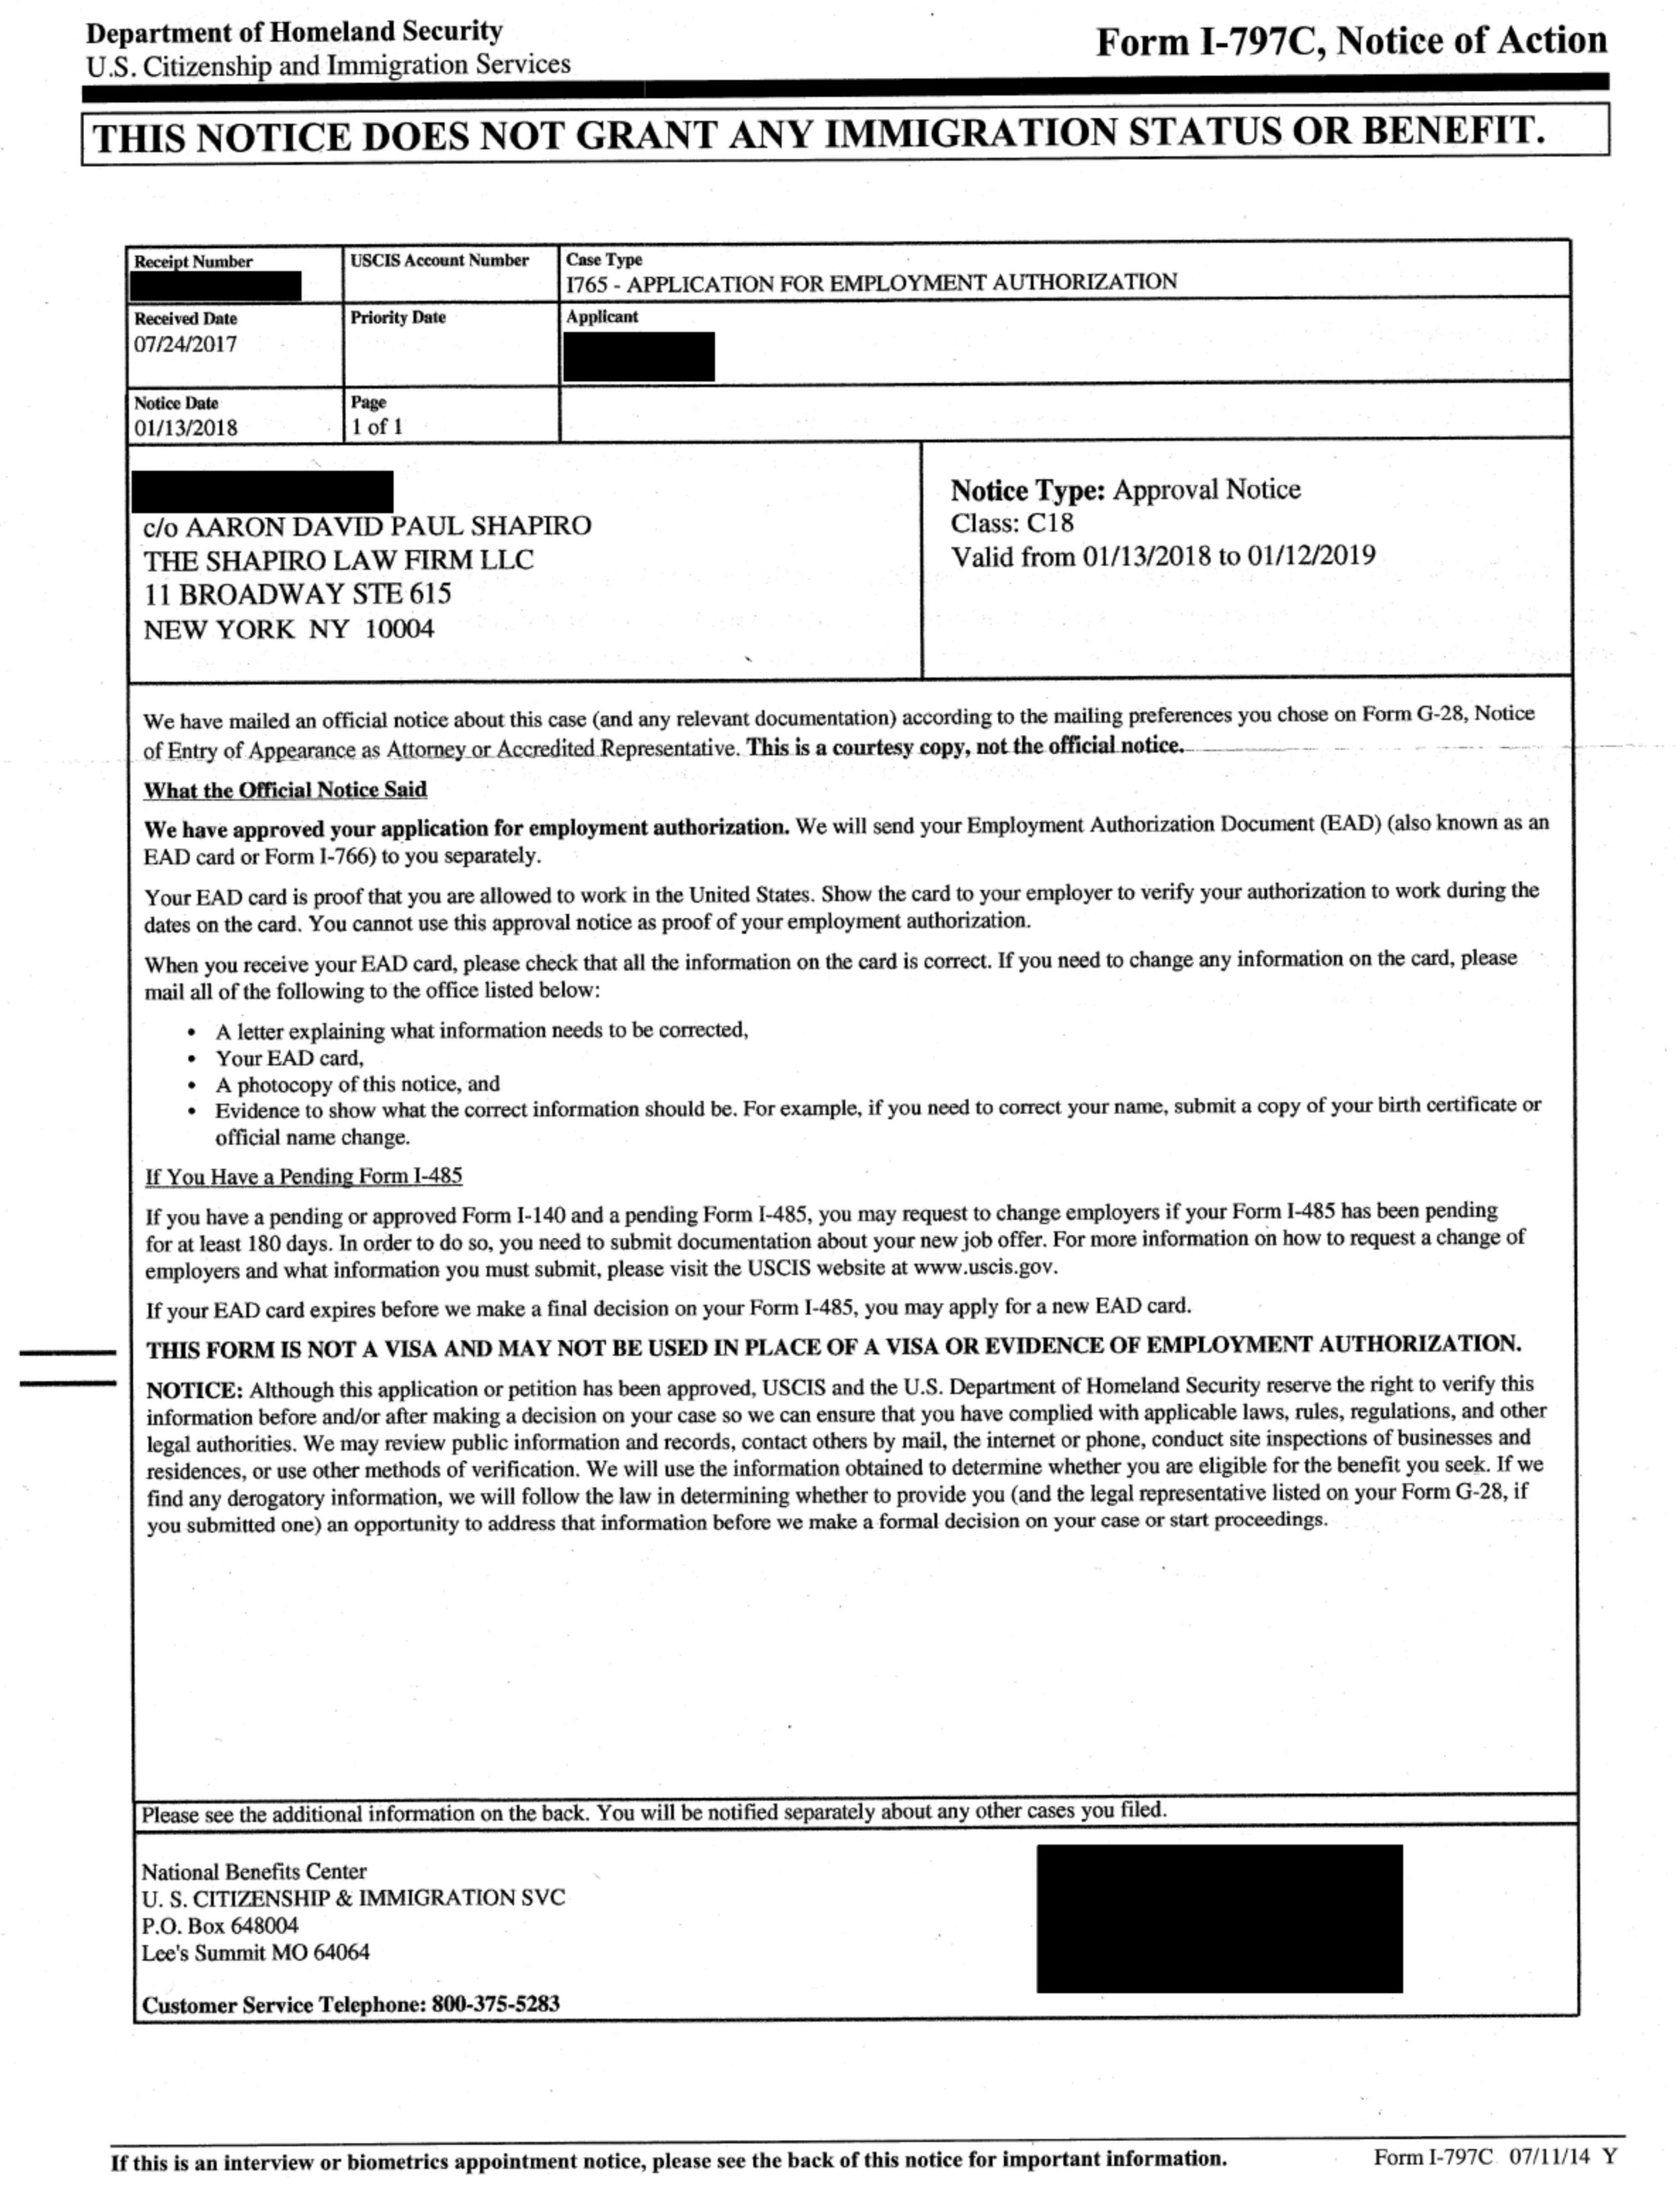 Form I-797C, Notice of Action -  I-765 Approval Notice